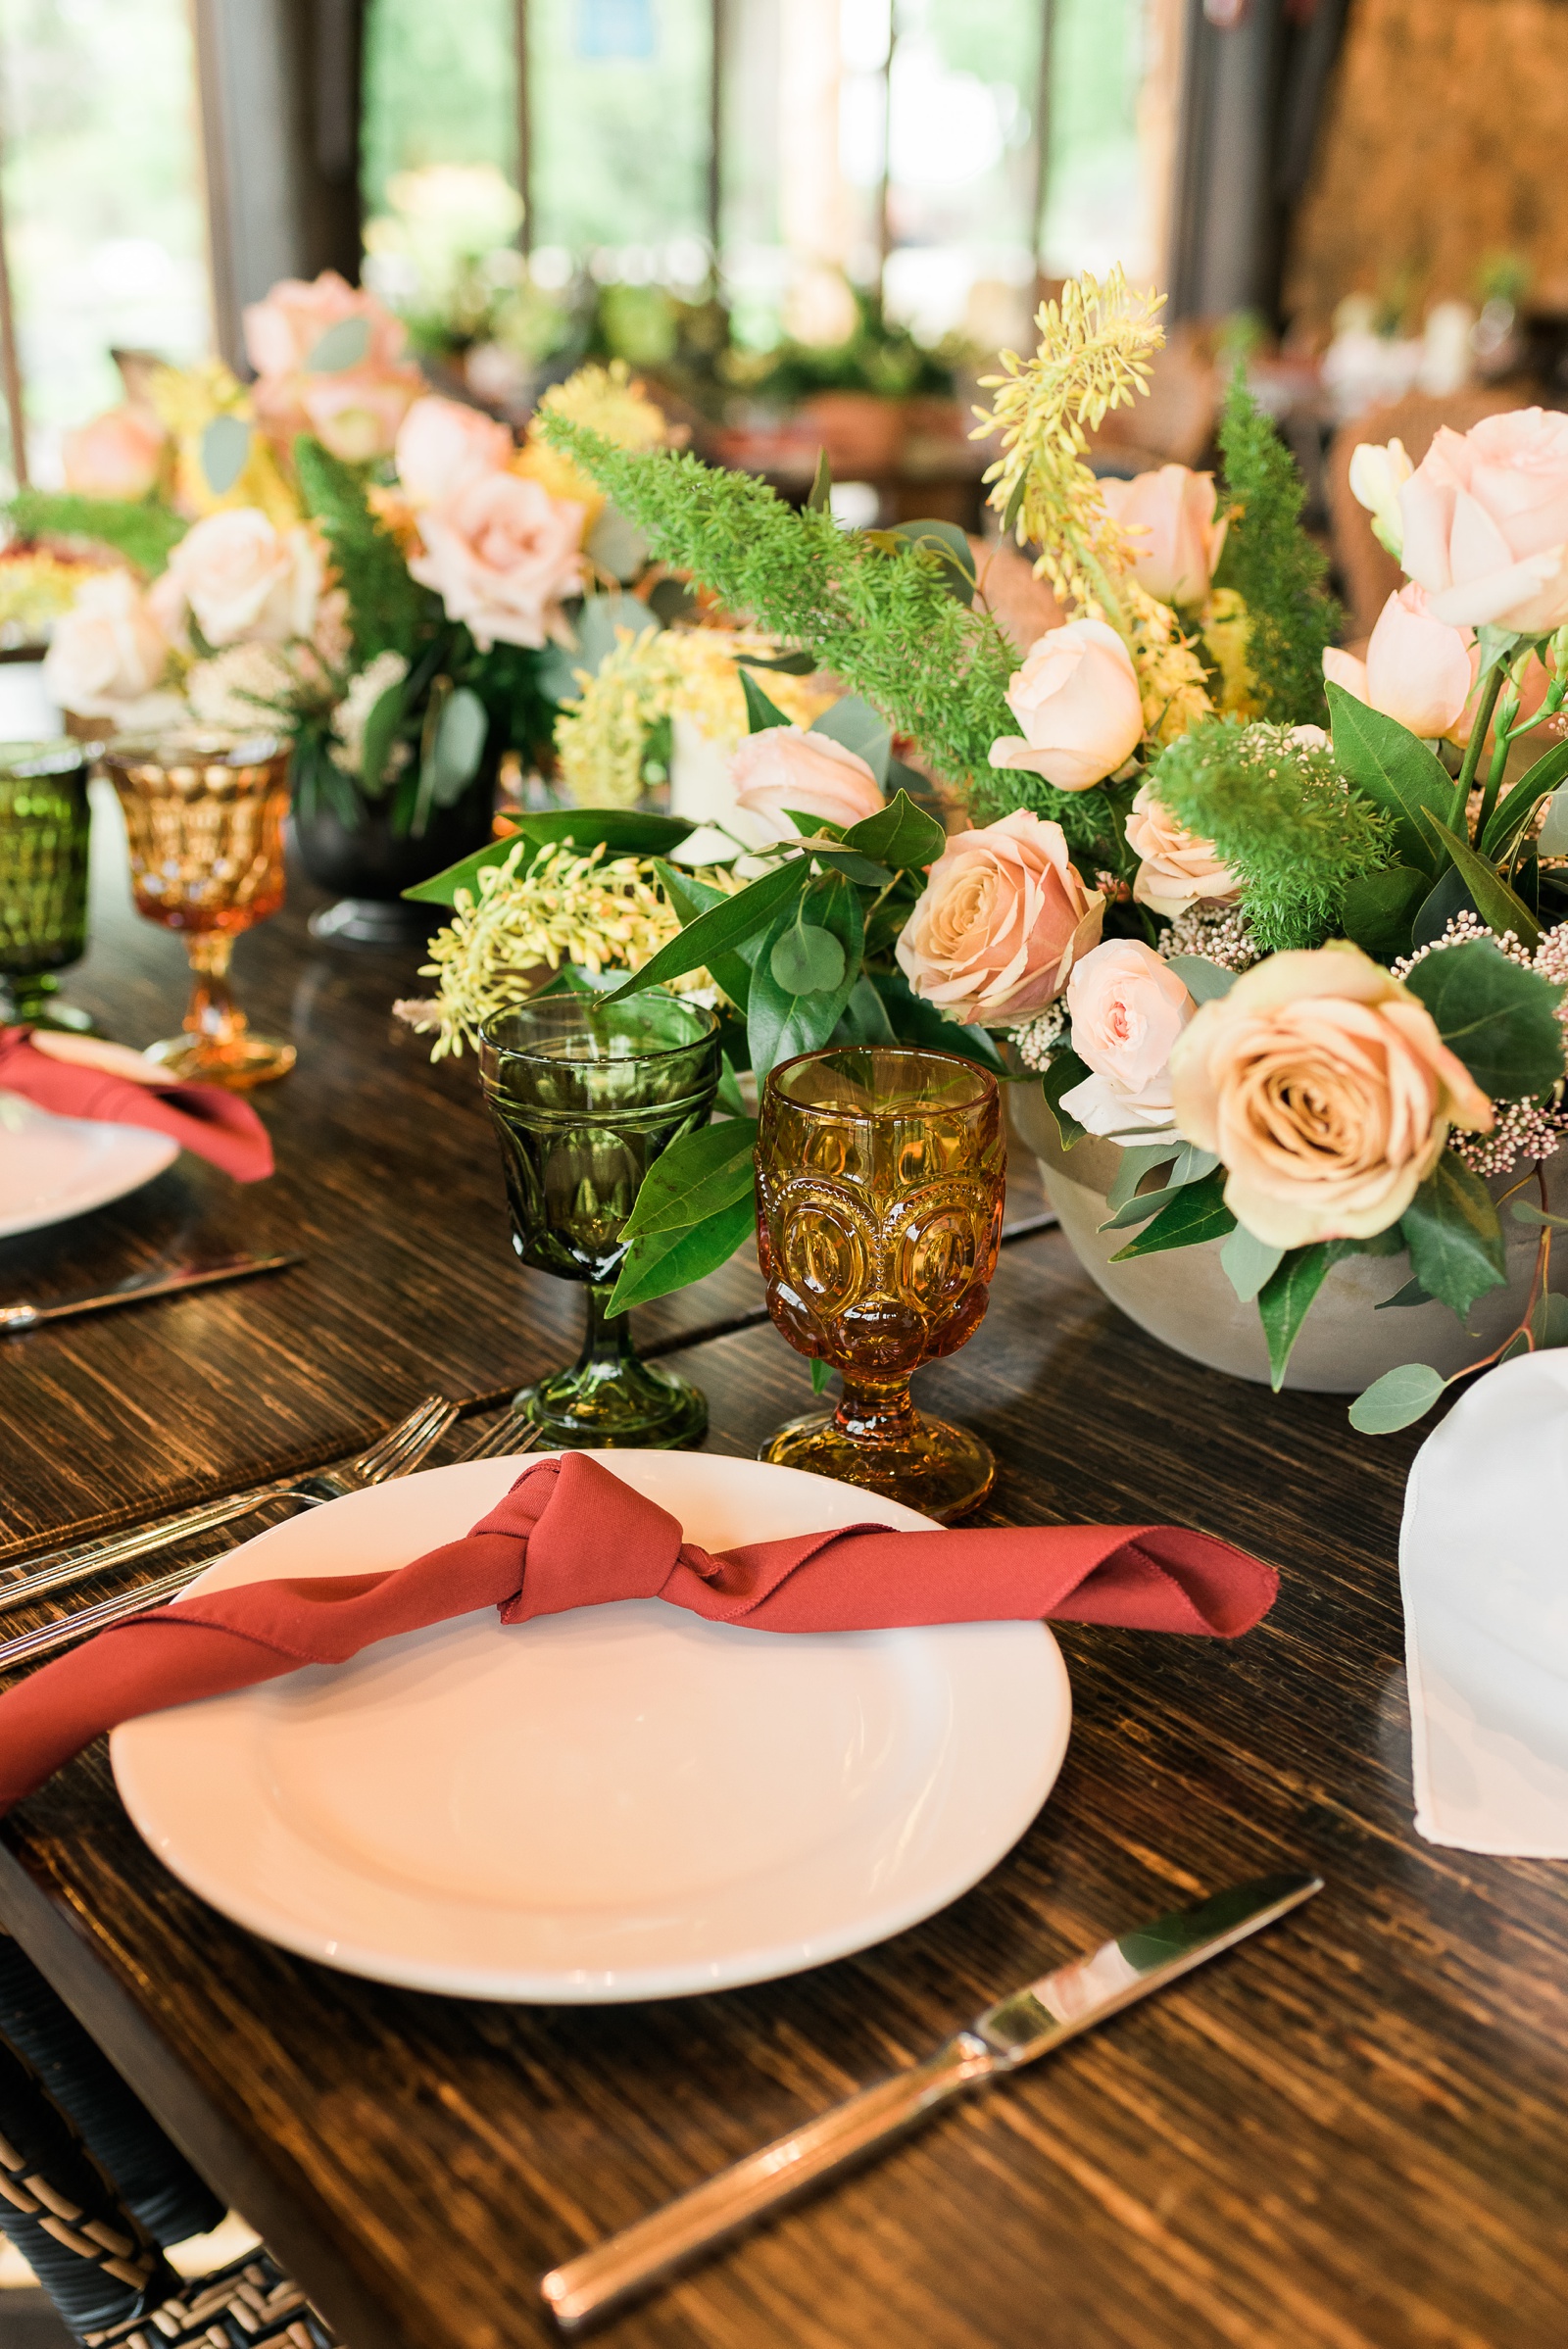 Table details of plate and floral arrangement